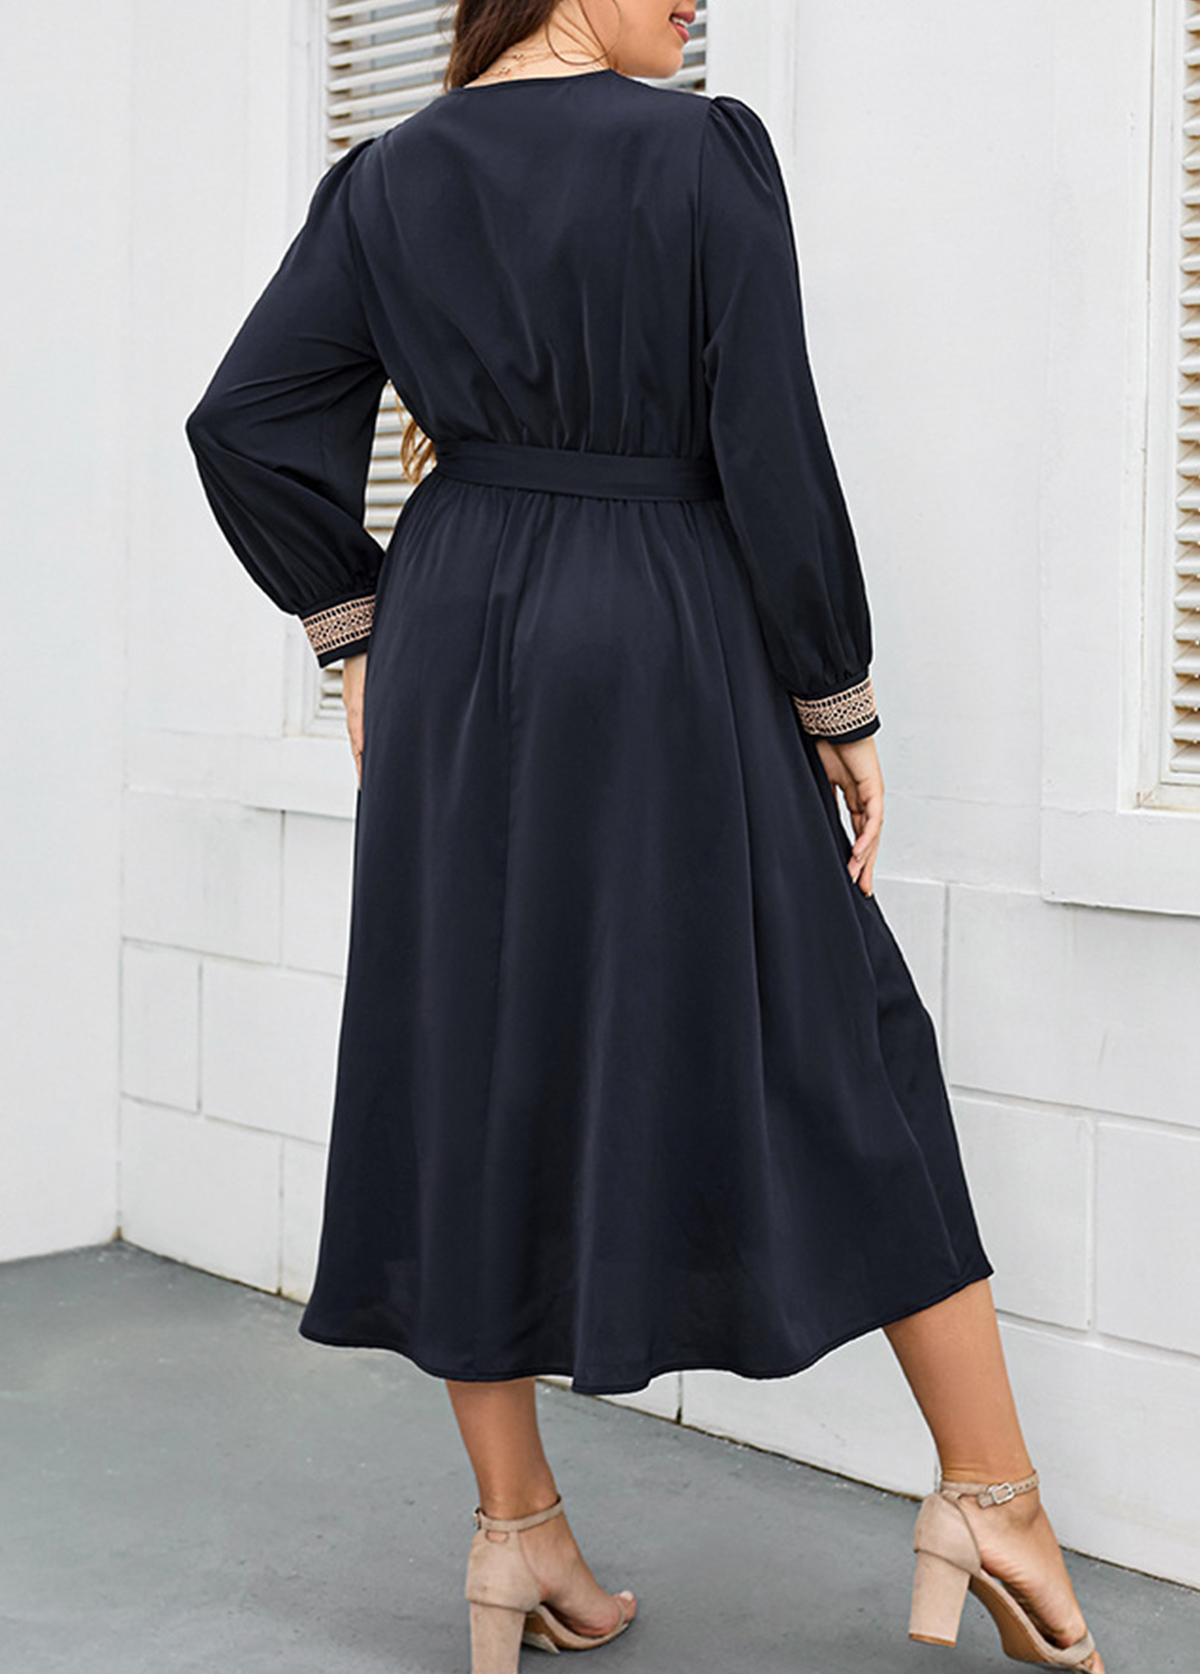 Navy Lace Plus Size Belted Long Sleeve Dress